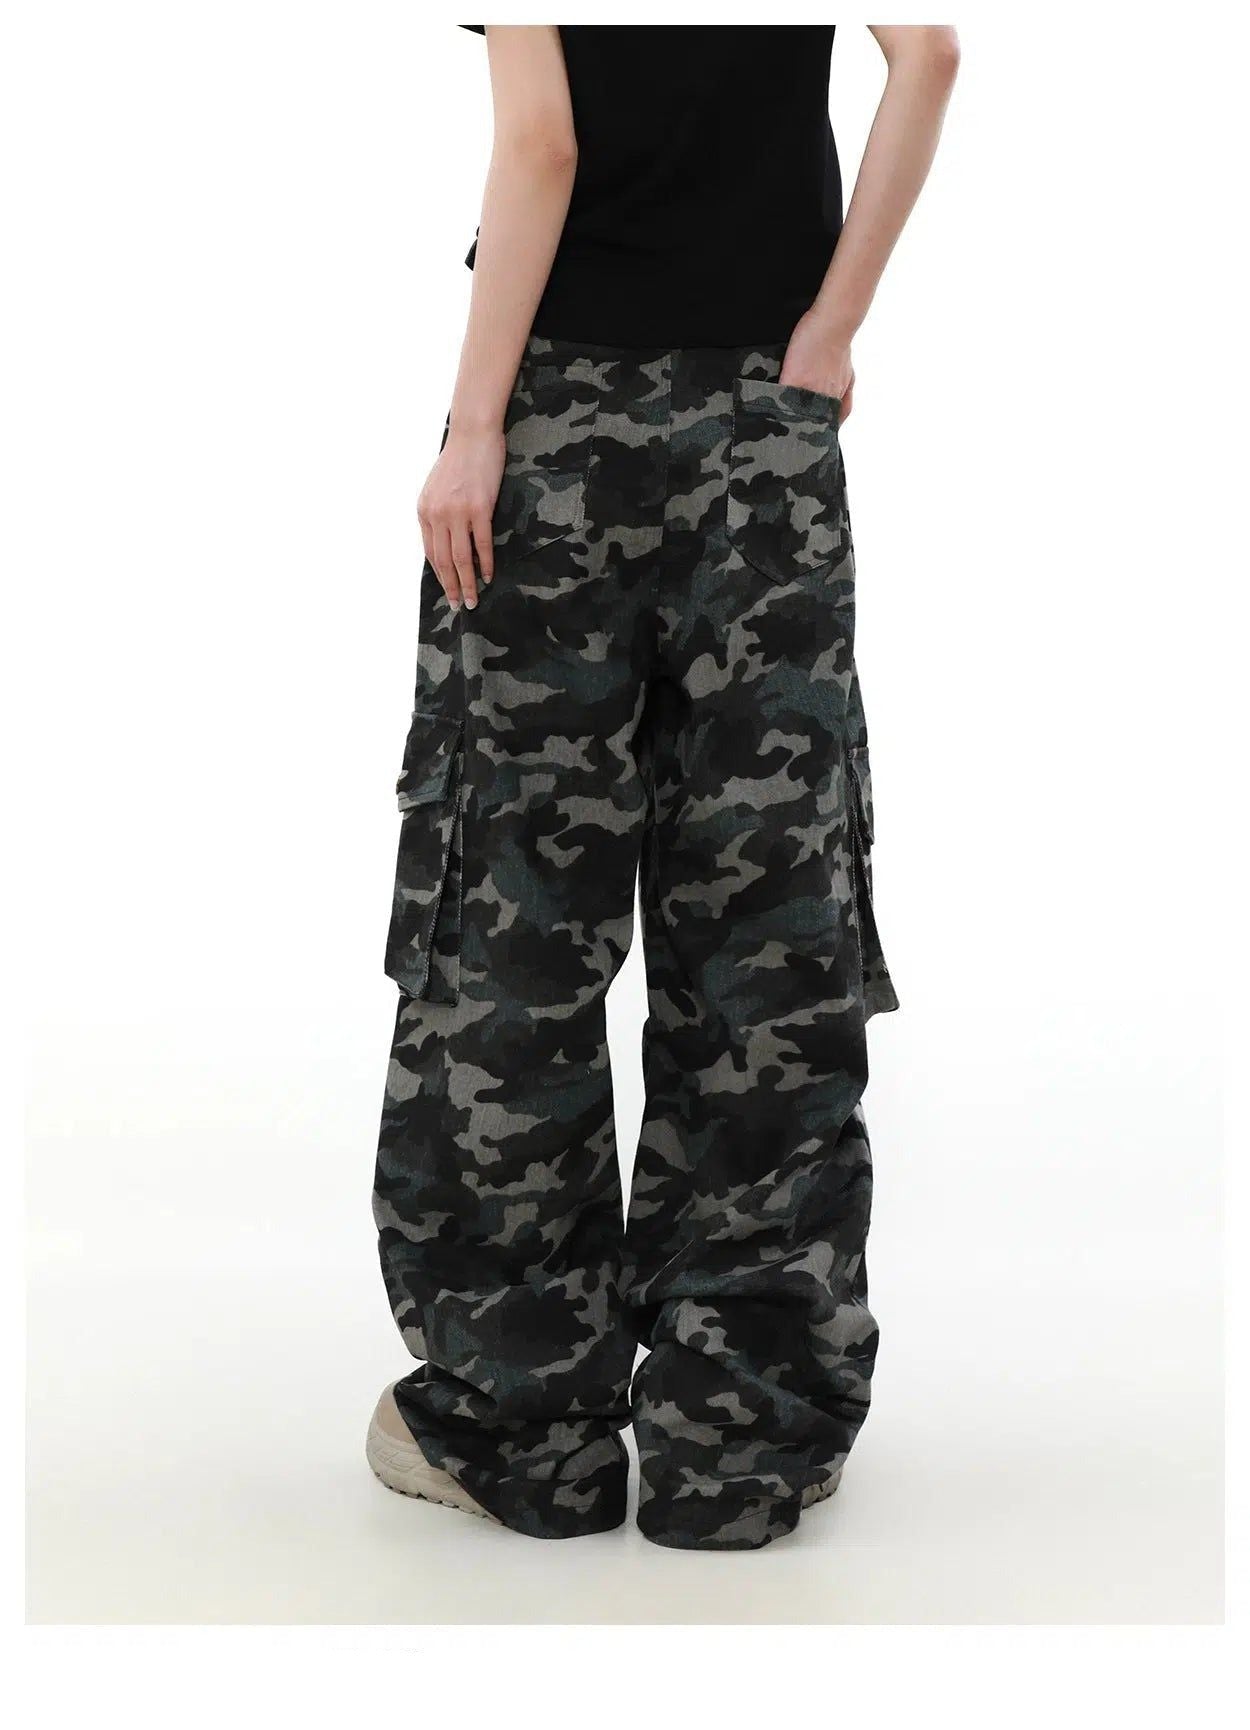 Camo Print Pocket Detail Cargo Pants Korean Street Fashion Pants By Mr Nearly Shop Online at OH Vault